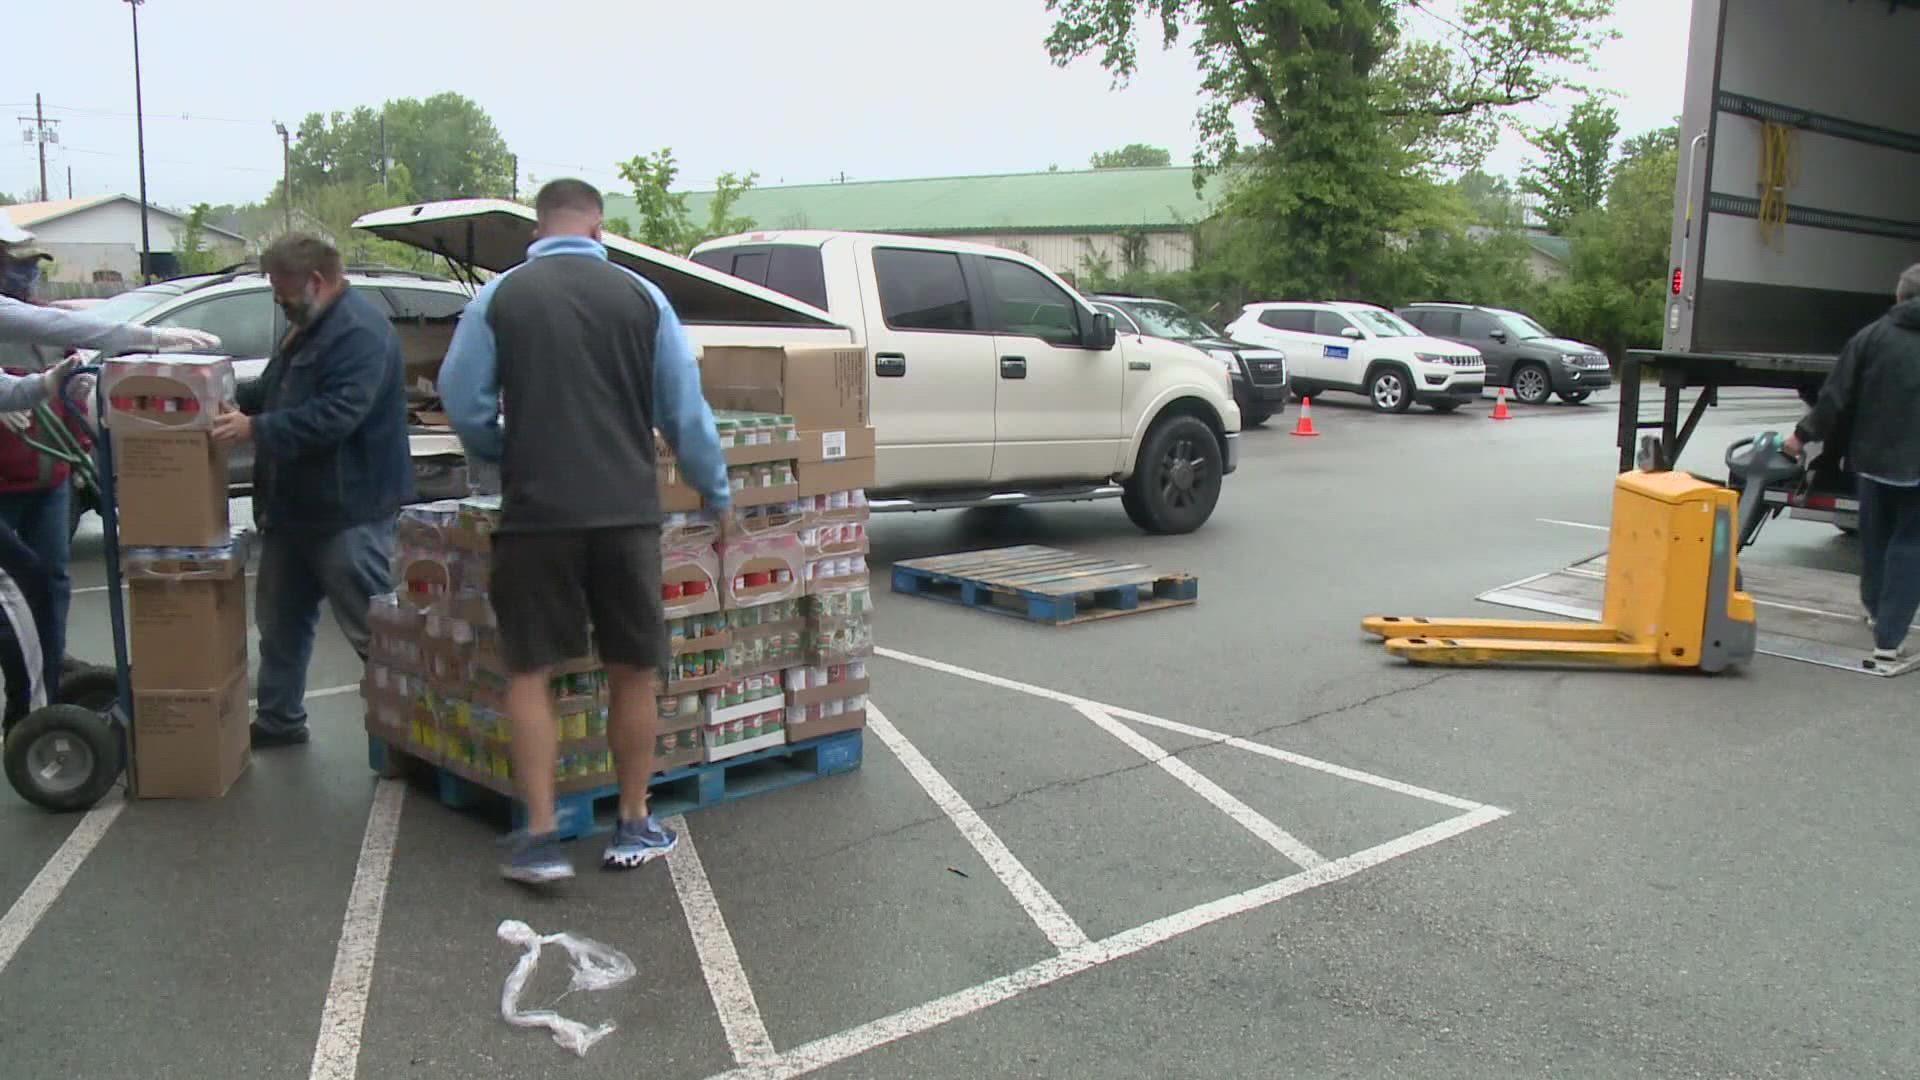 The company has partnered with Louisville's 'Dare to Care' to deliver thousands of pounds of food to help fight hunger.